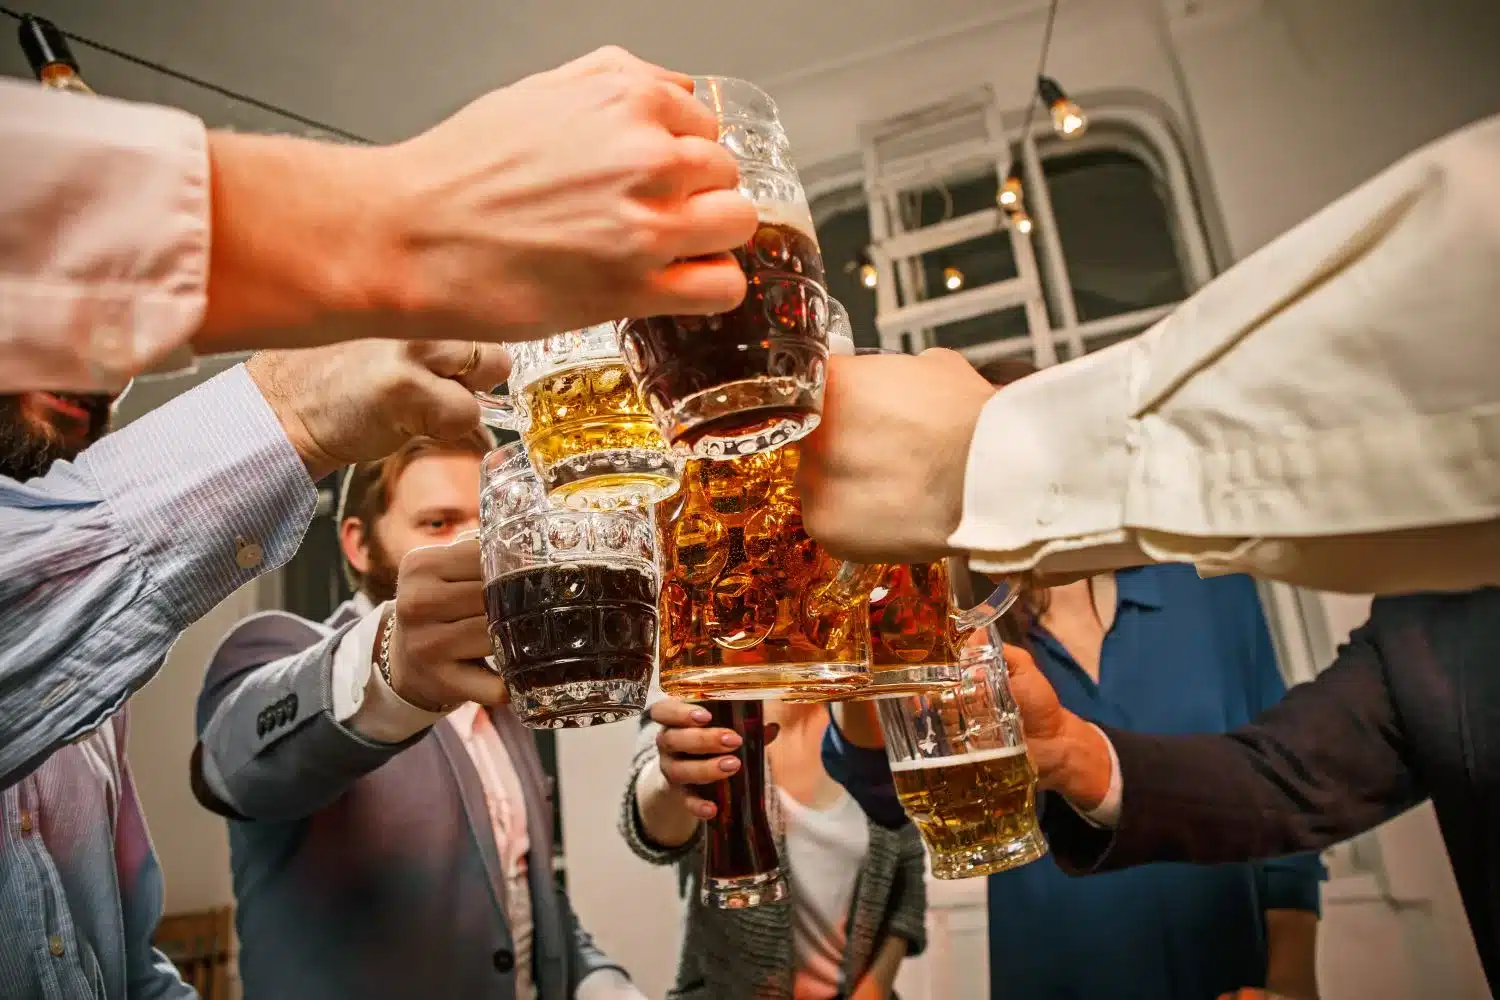 Party with us - pub crawl services in Edmonton by SkipLine Parties